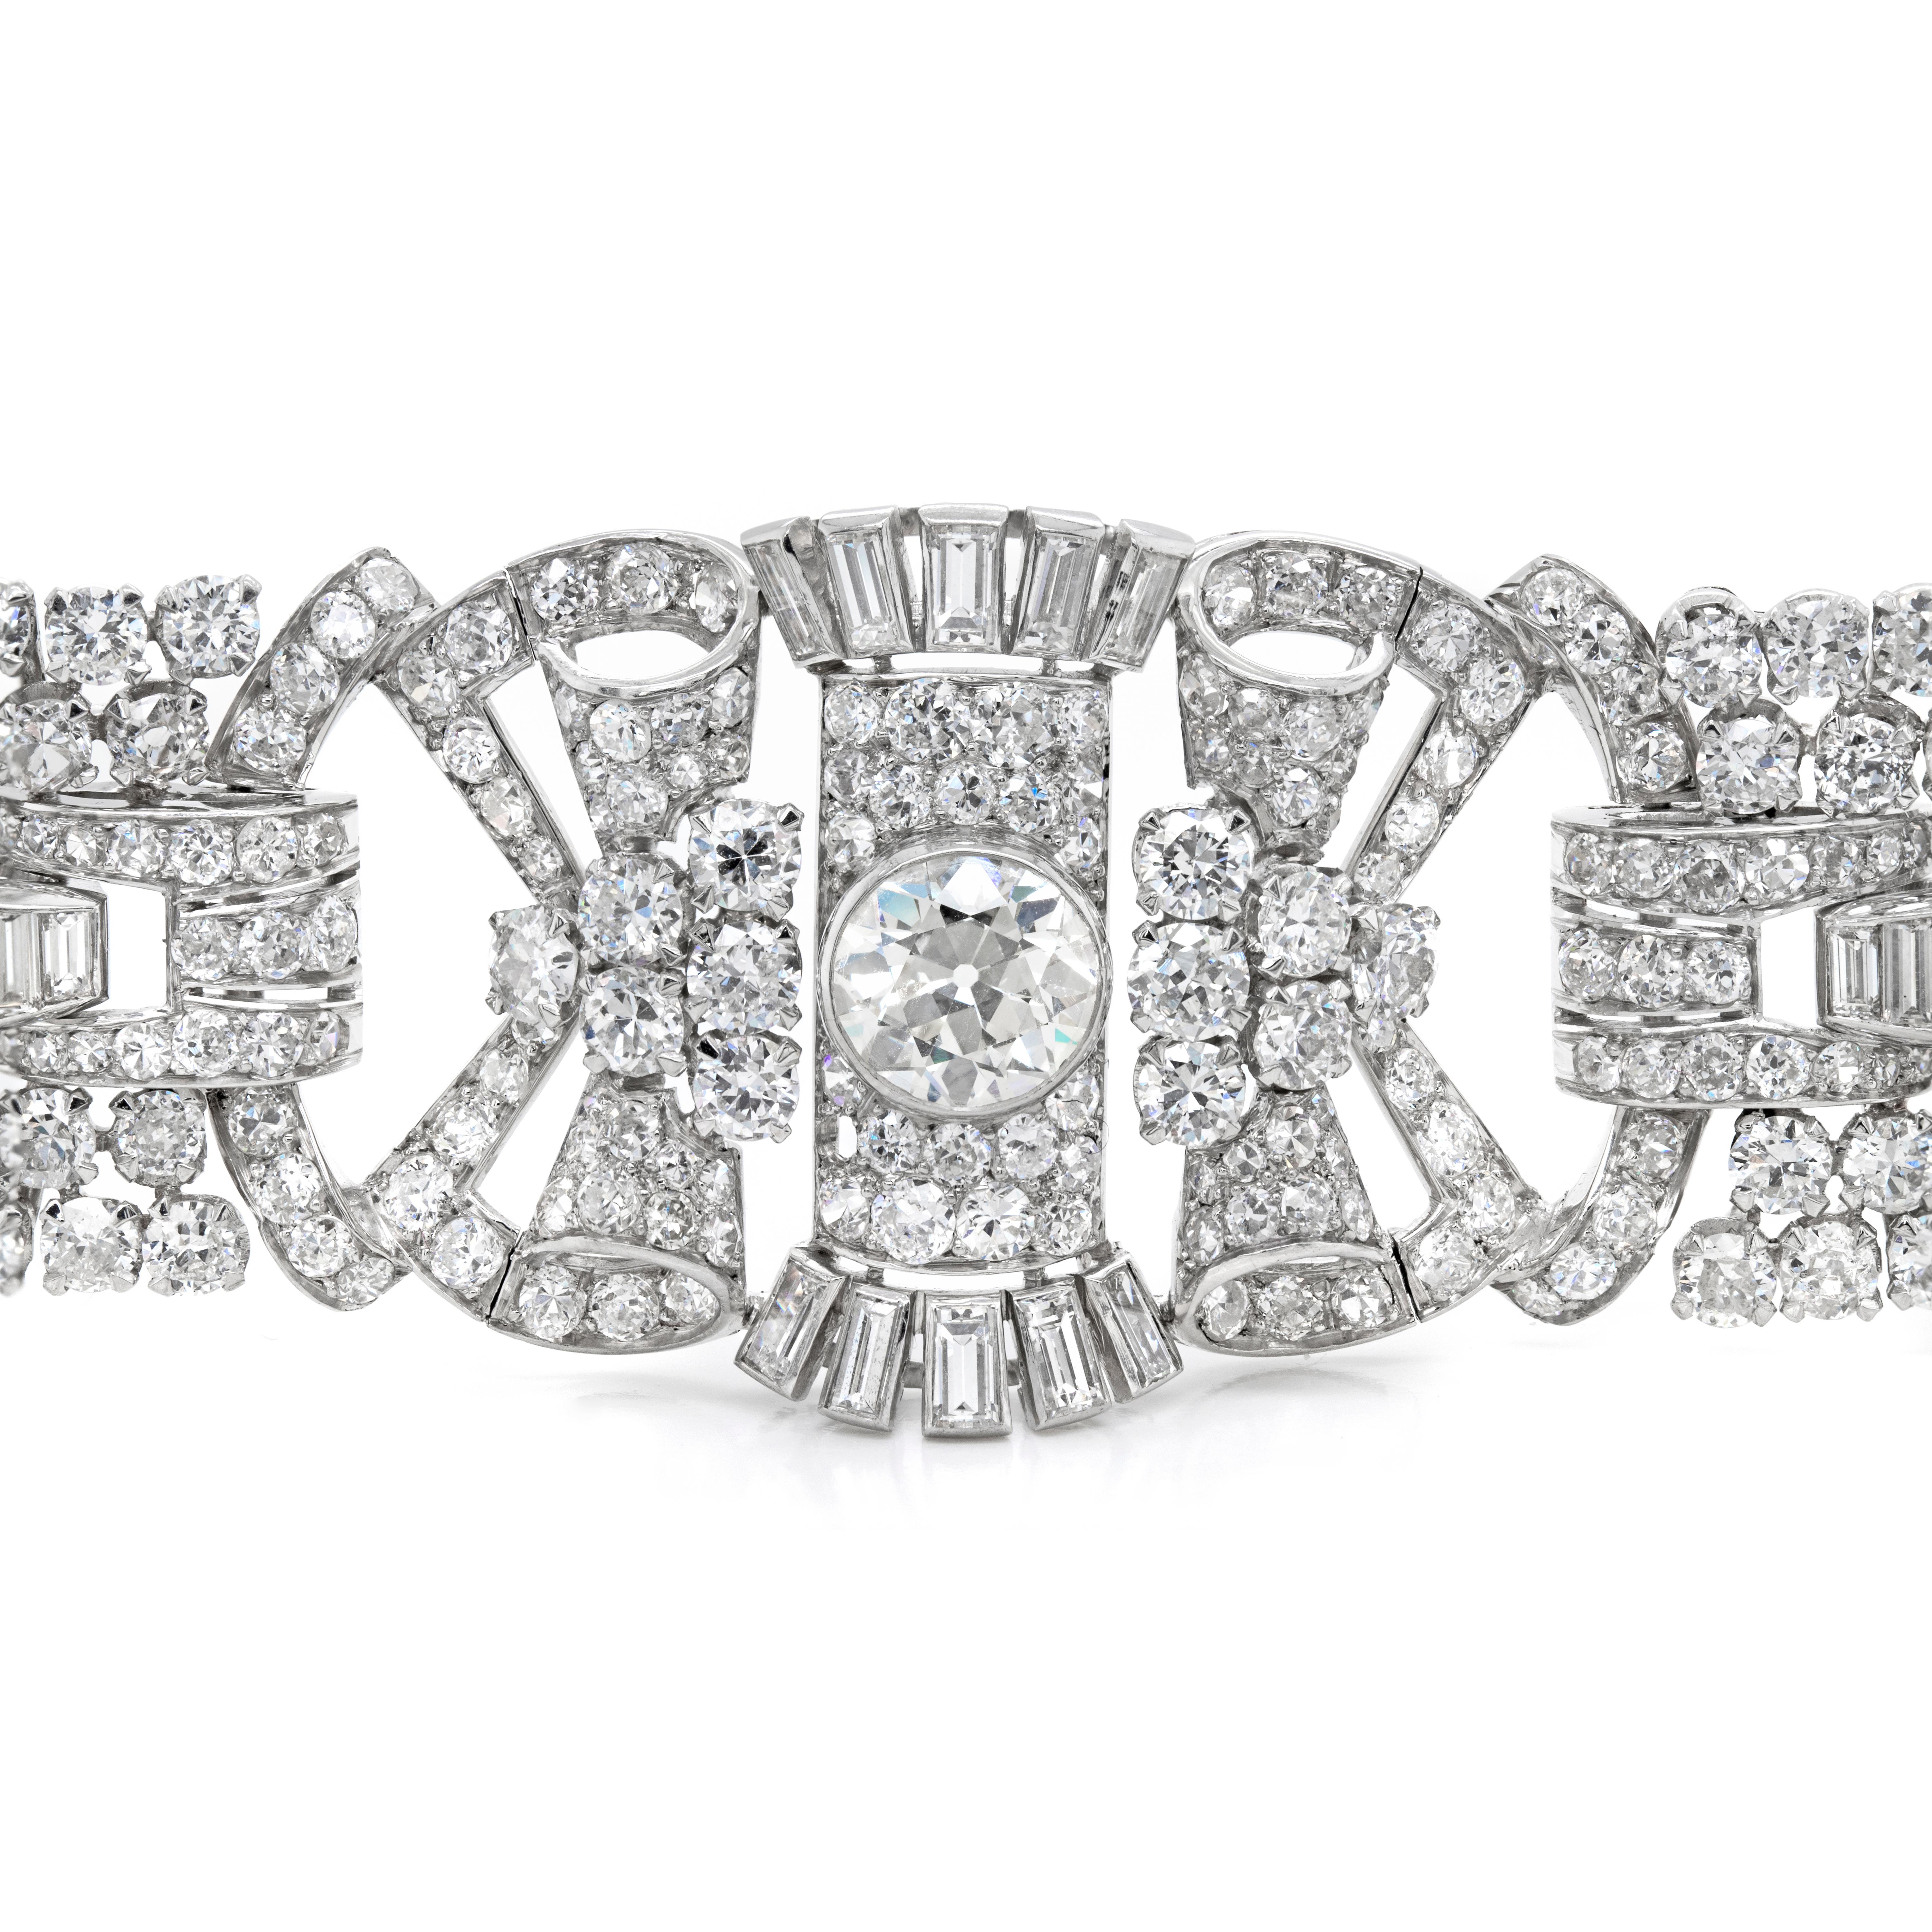 An exceptional handmade 1920's Art Deco bracelet set with a grand total of 573 diamonds totaling to an impressive approximate weight of 42.00 carats. This beautiful piece features 3 larger rubover set old cut diamonds on 3 links, with the centre